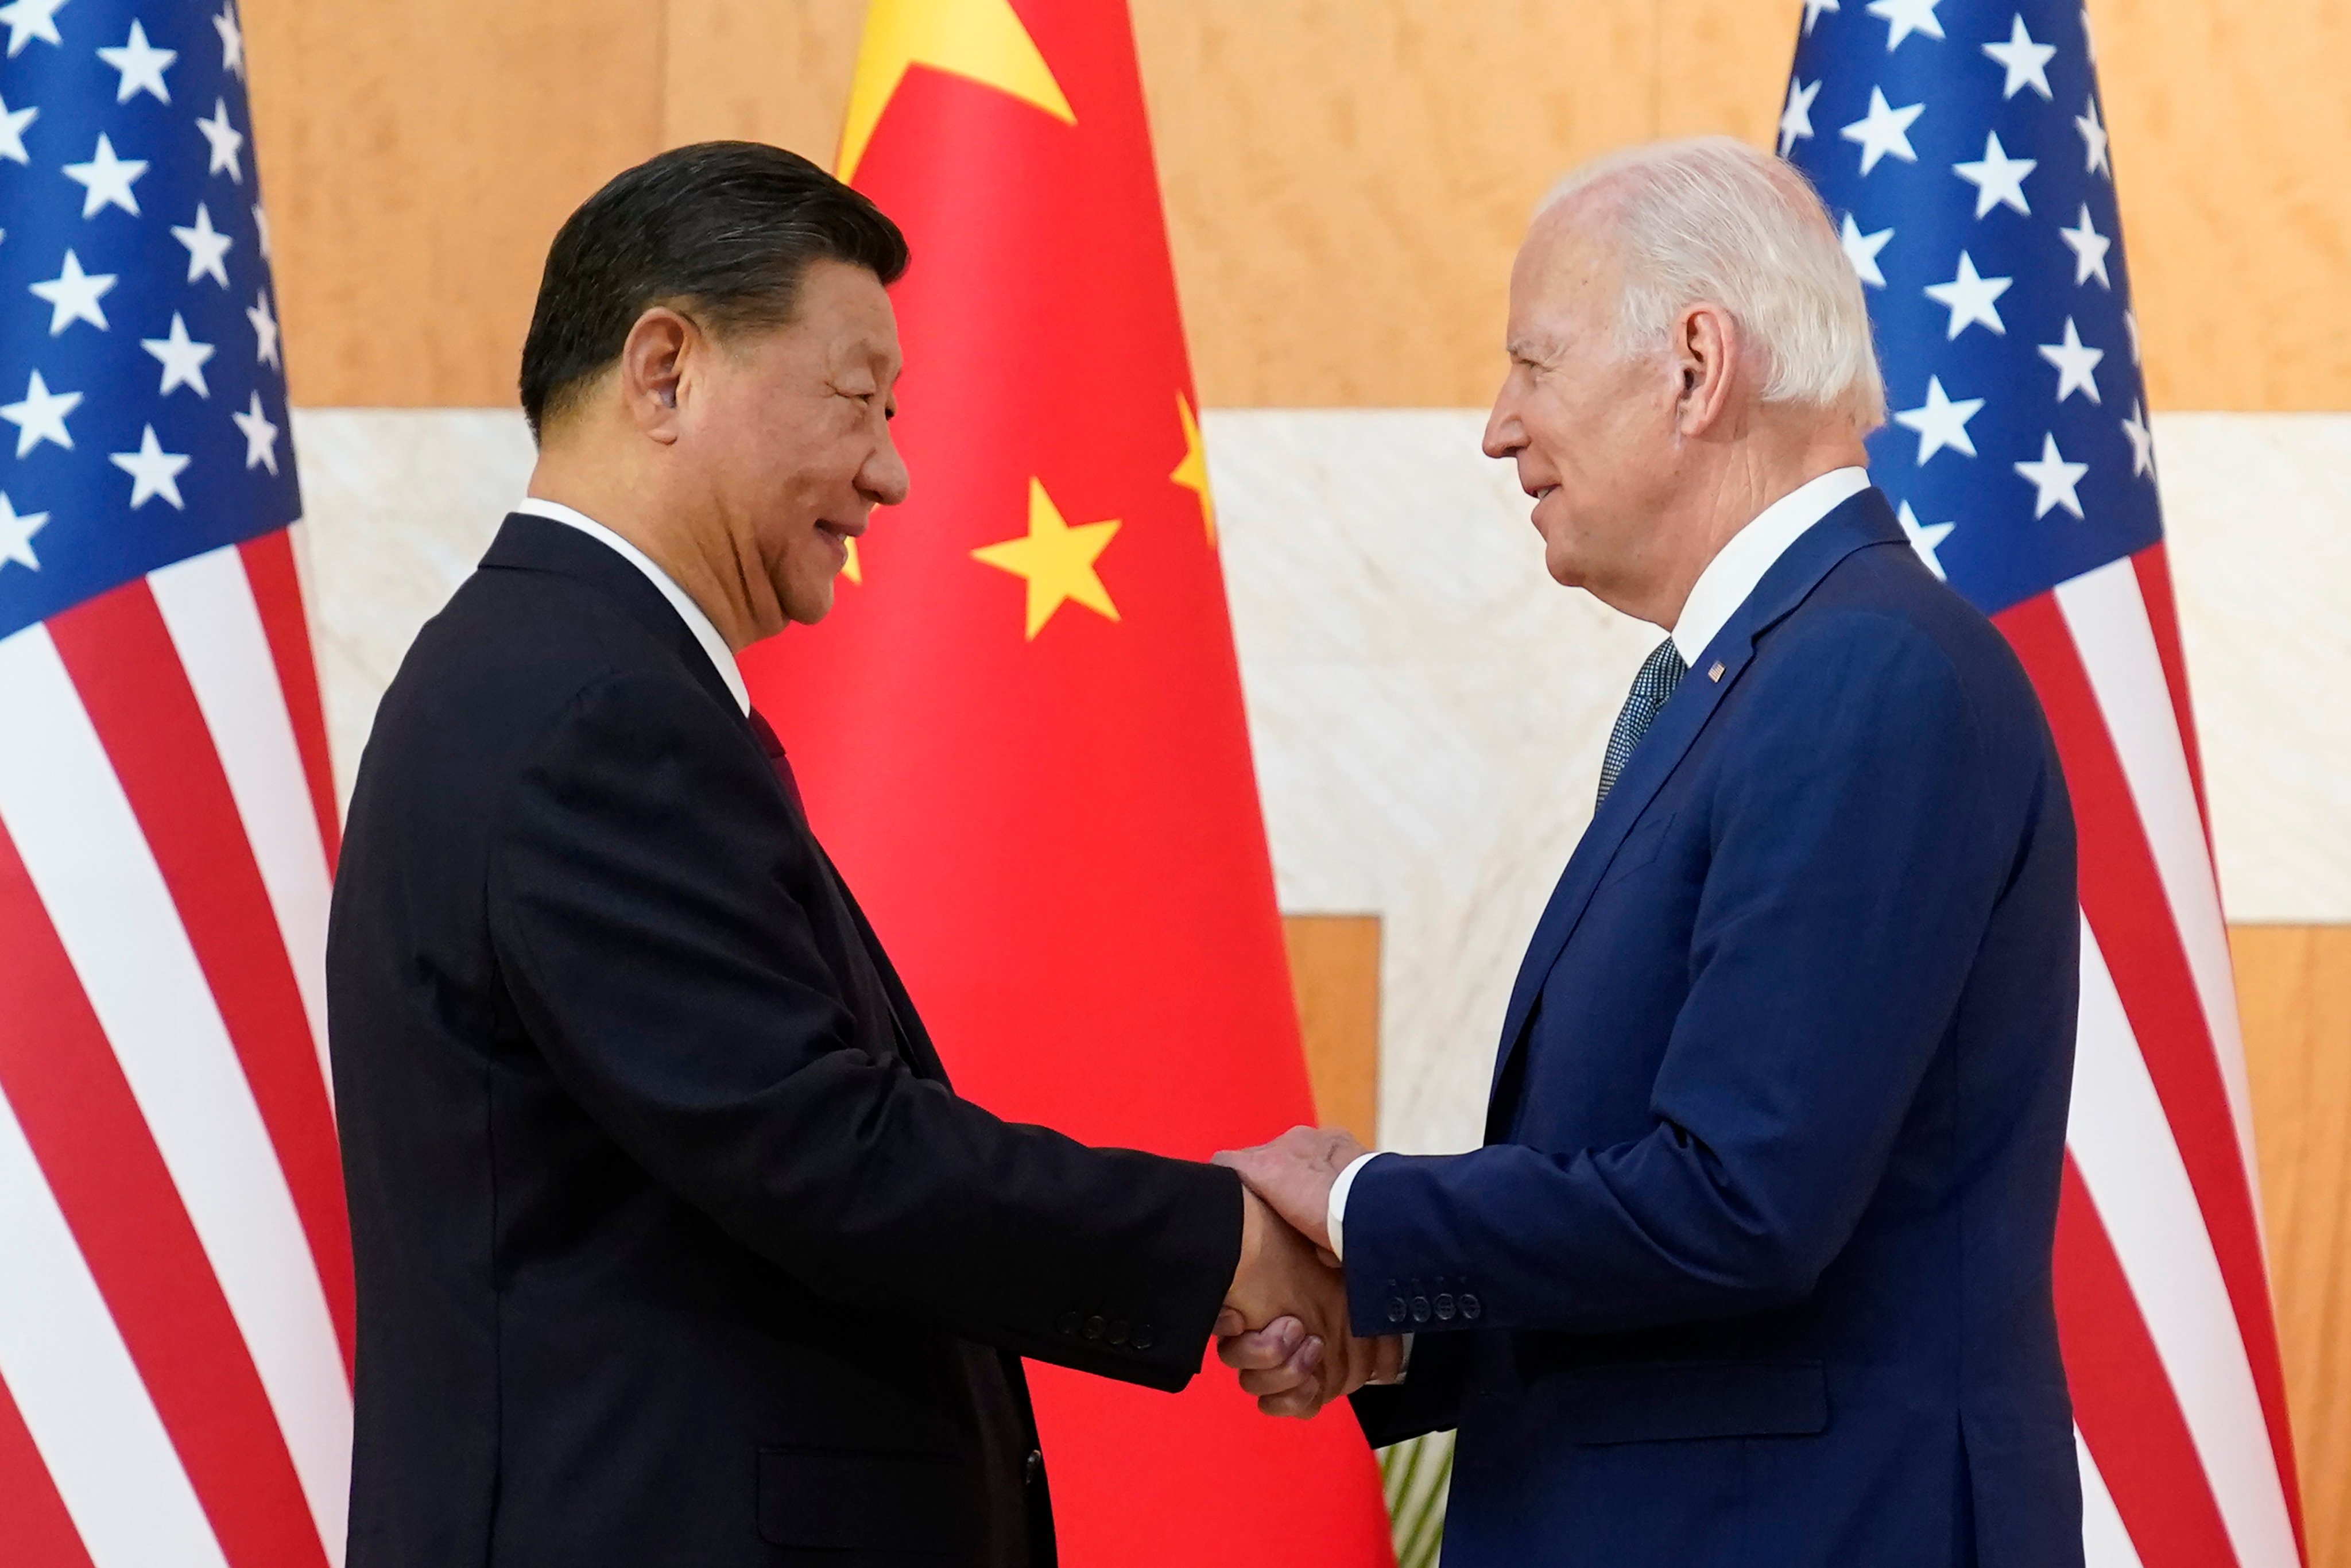 US President Joe Biden and Chinese President Xi Jinping meet on the sidelines of the G20 summit meeting in November 2022, in Bali, Indonesia. Photo: AP